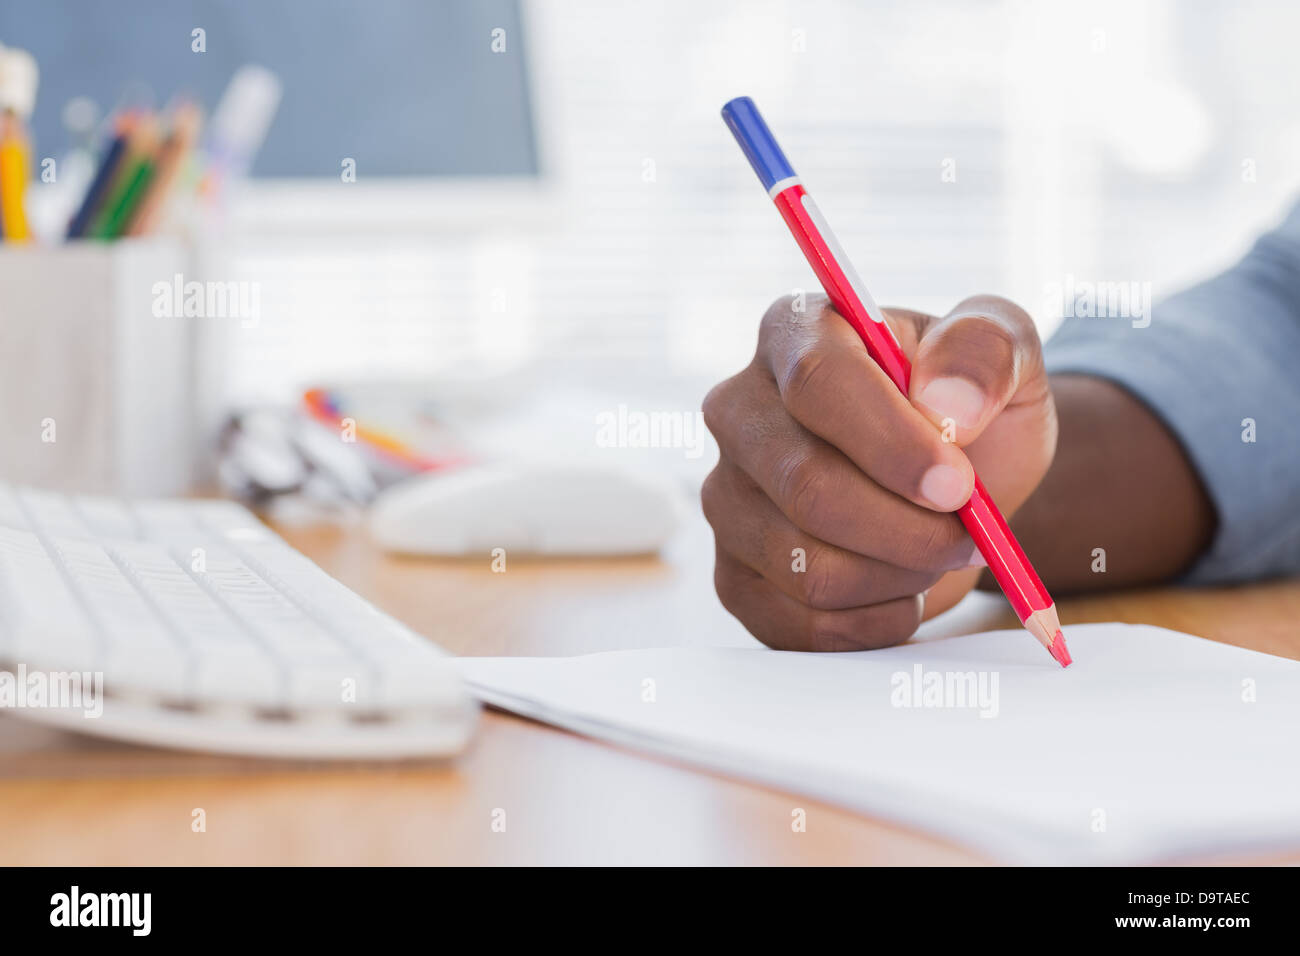 Man drawing with a red pencil on a desk Stock Photo